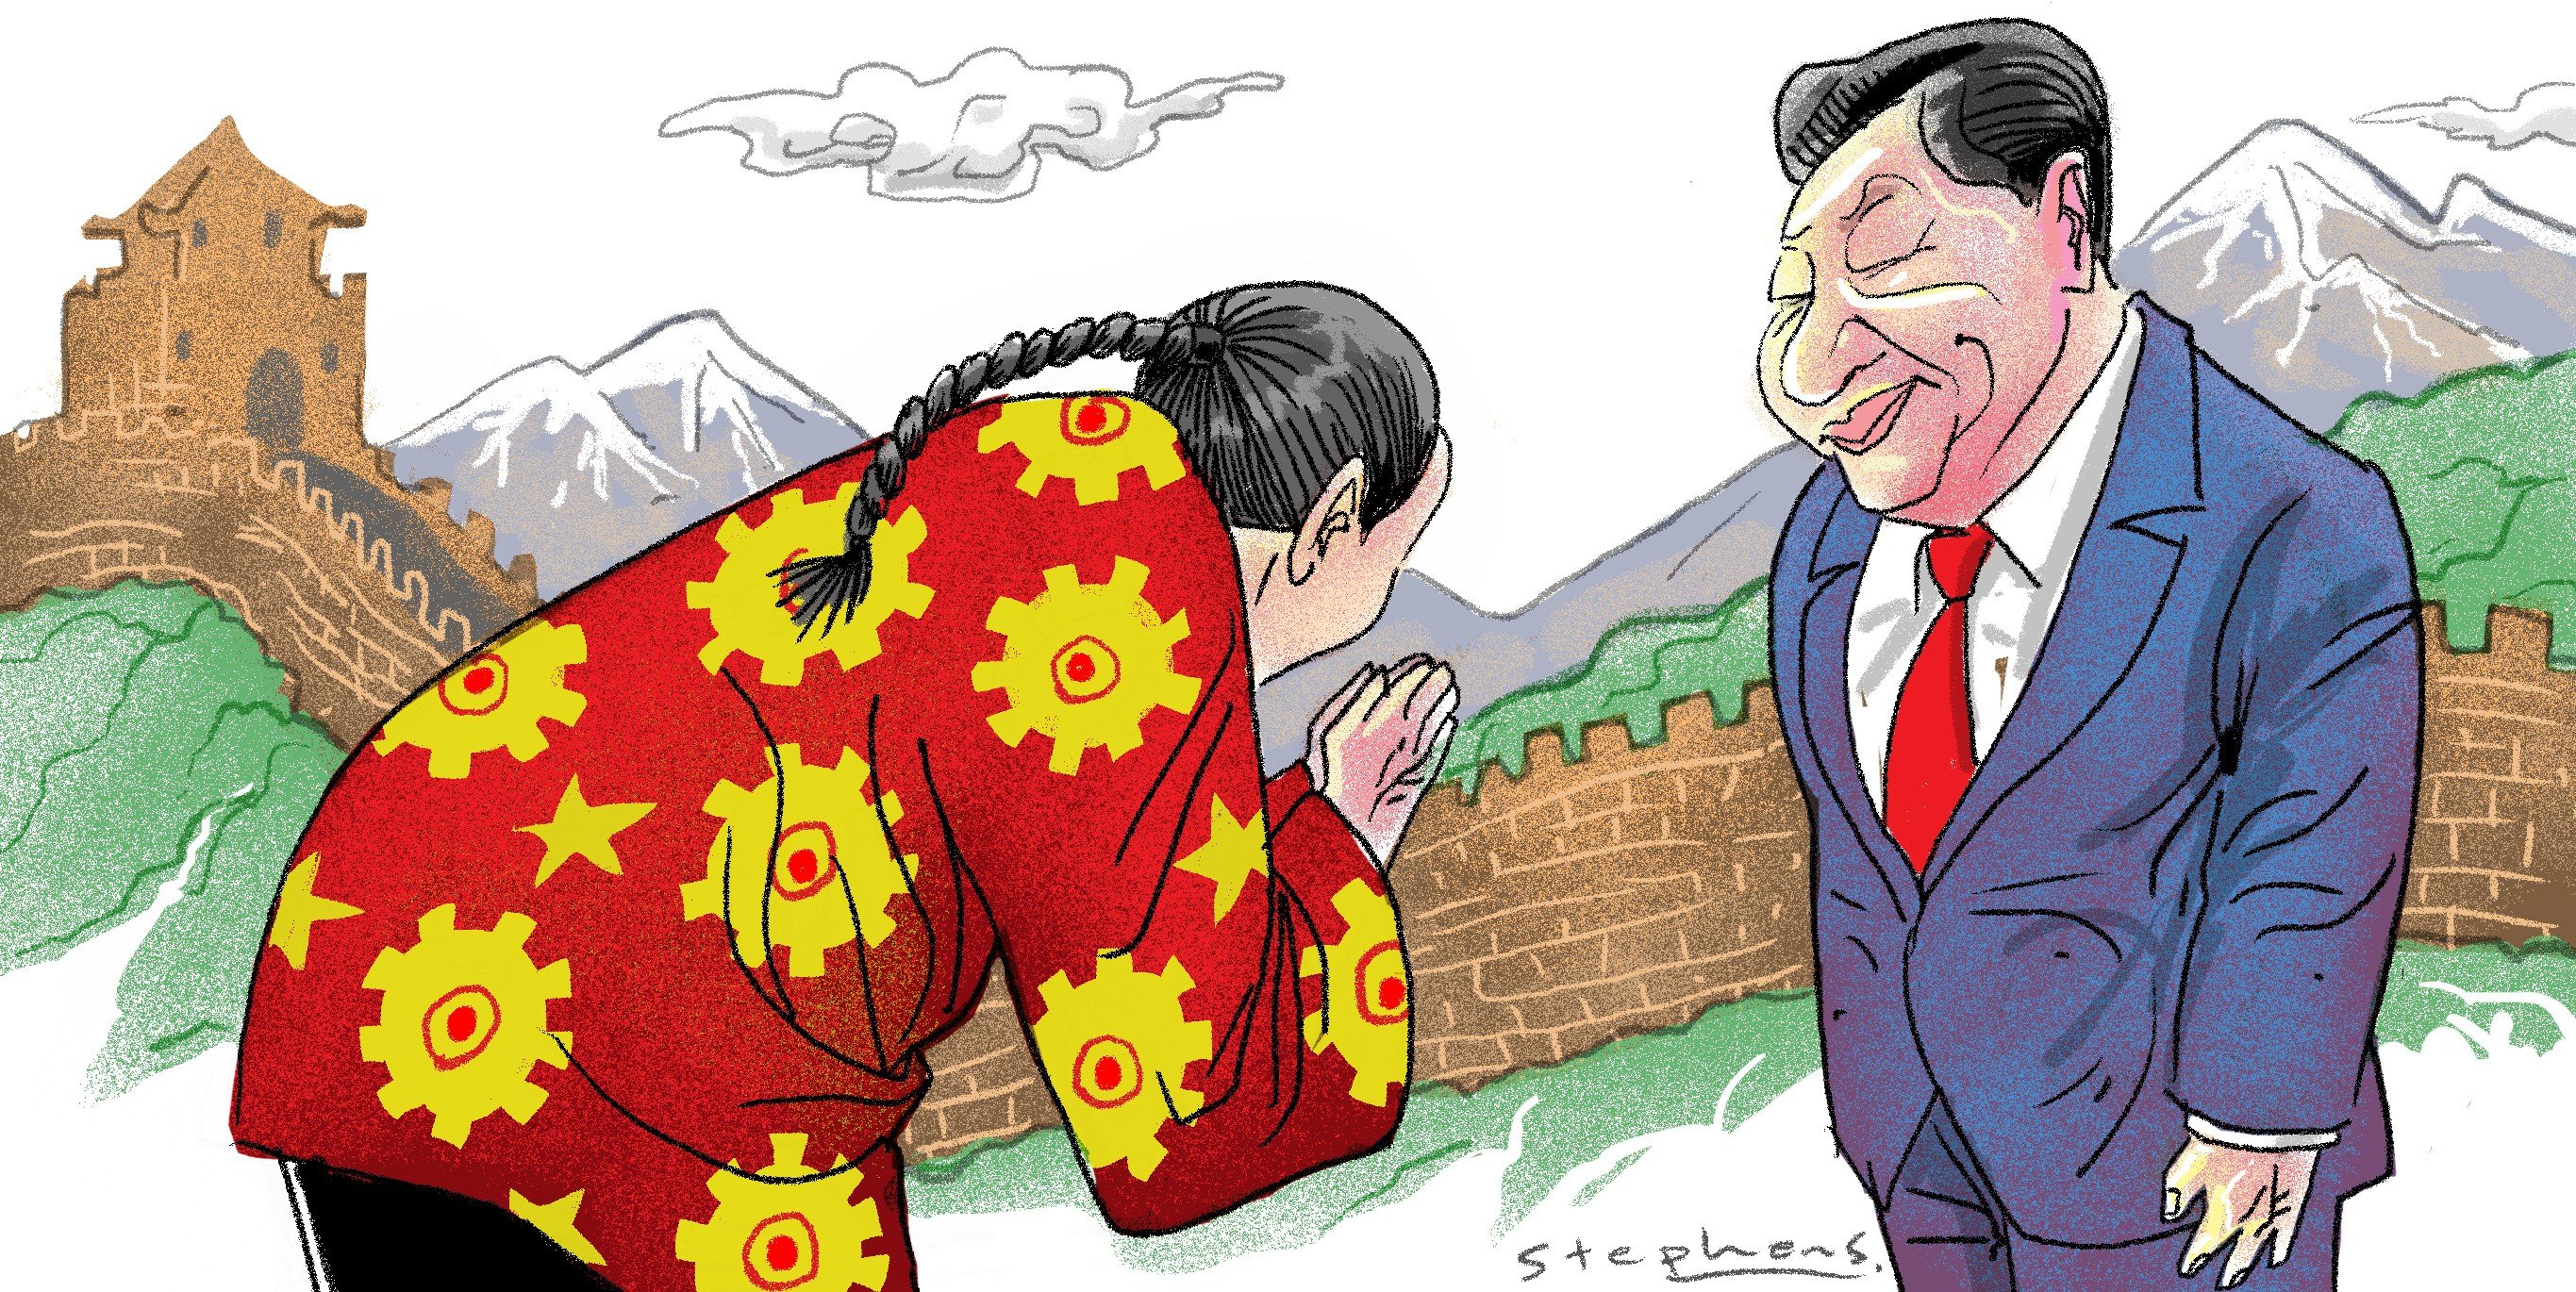 Some argue that doing away with term limits shows the superiority of the Chinese system as it allows flexibility in matching leadership to requirements. Illustration: Craig Stephens